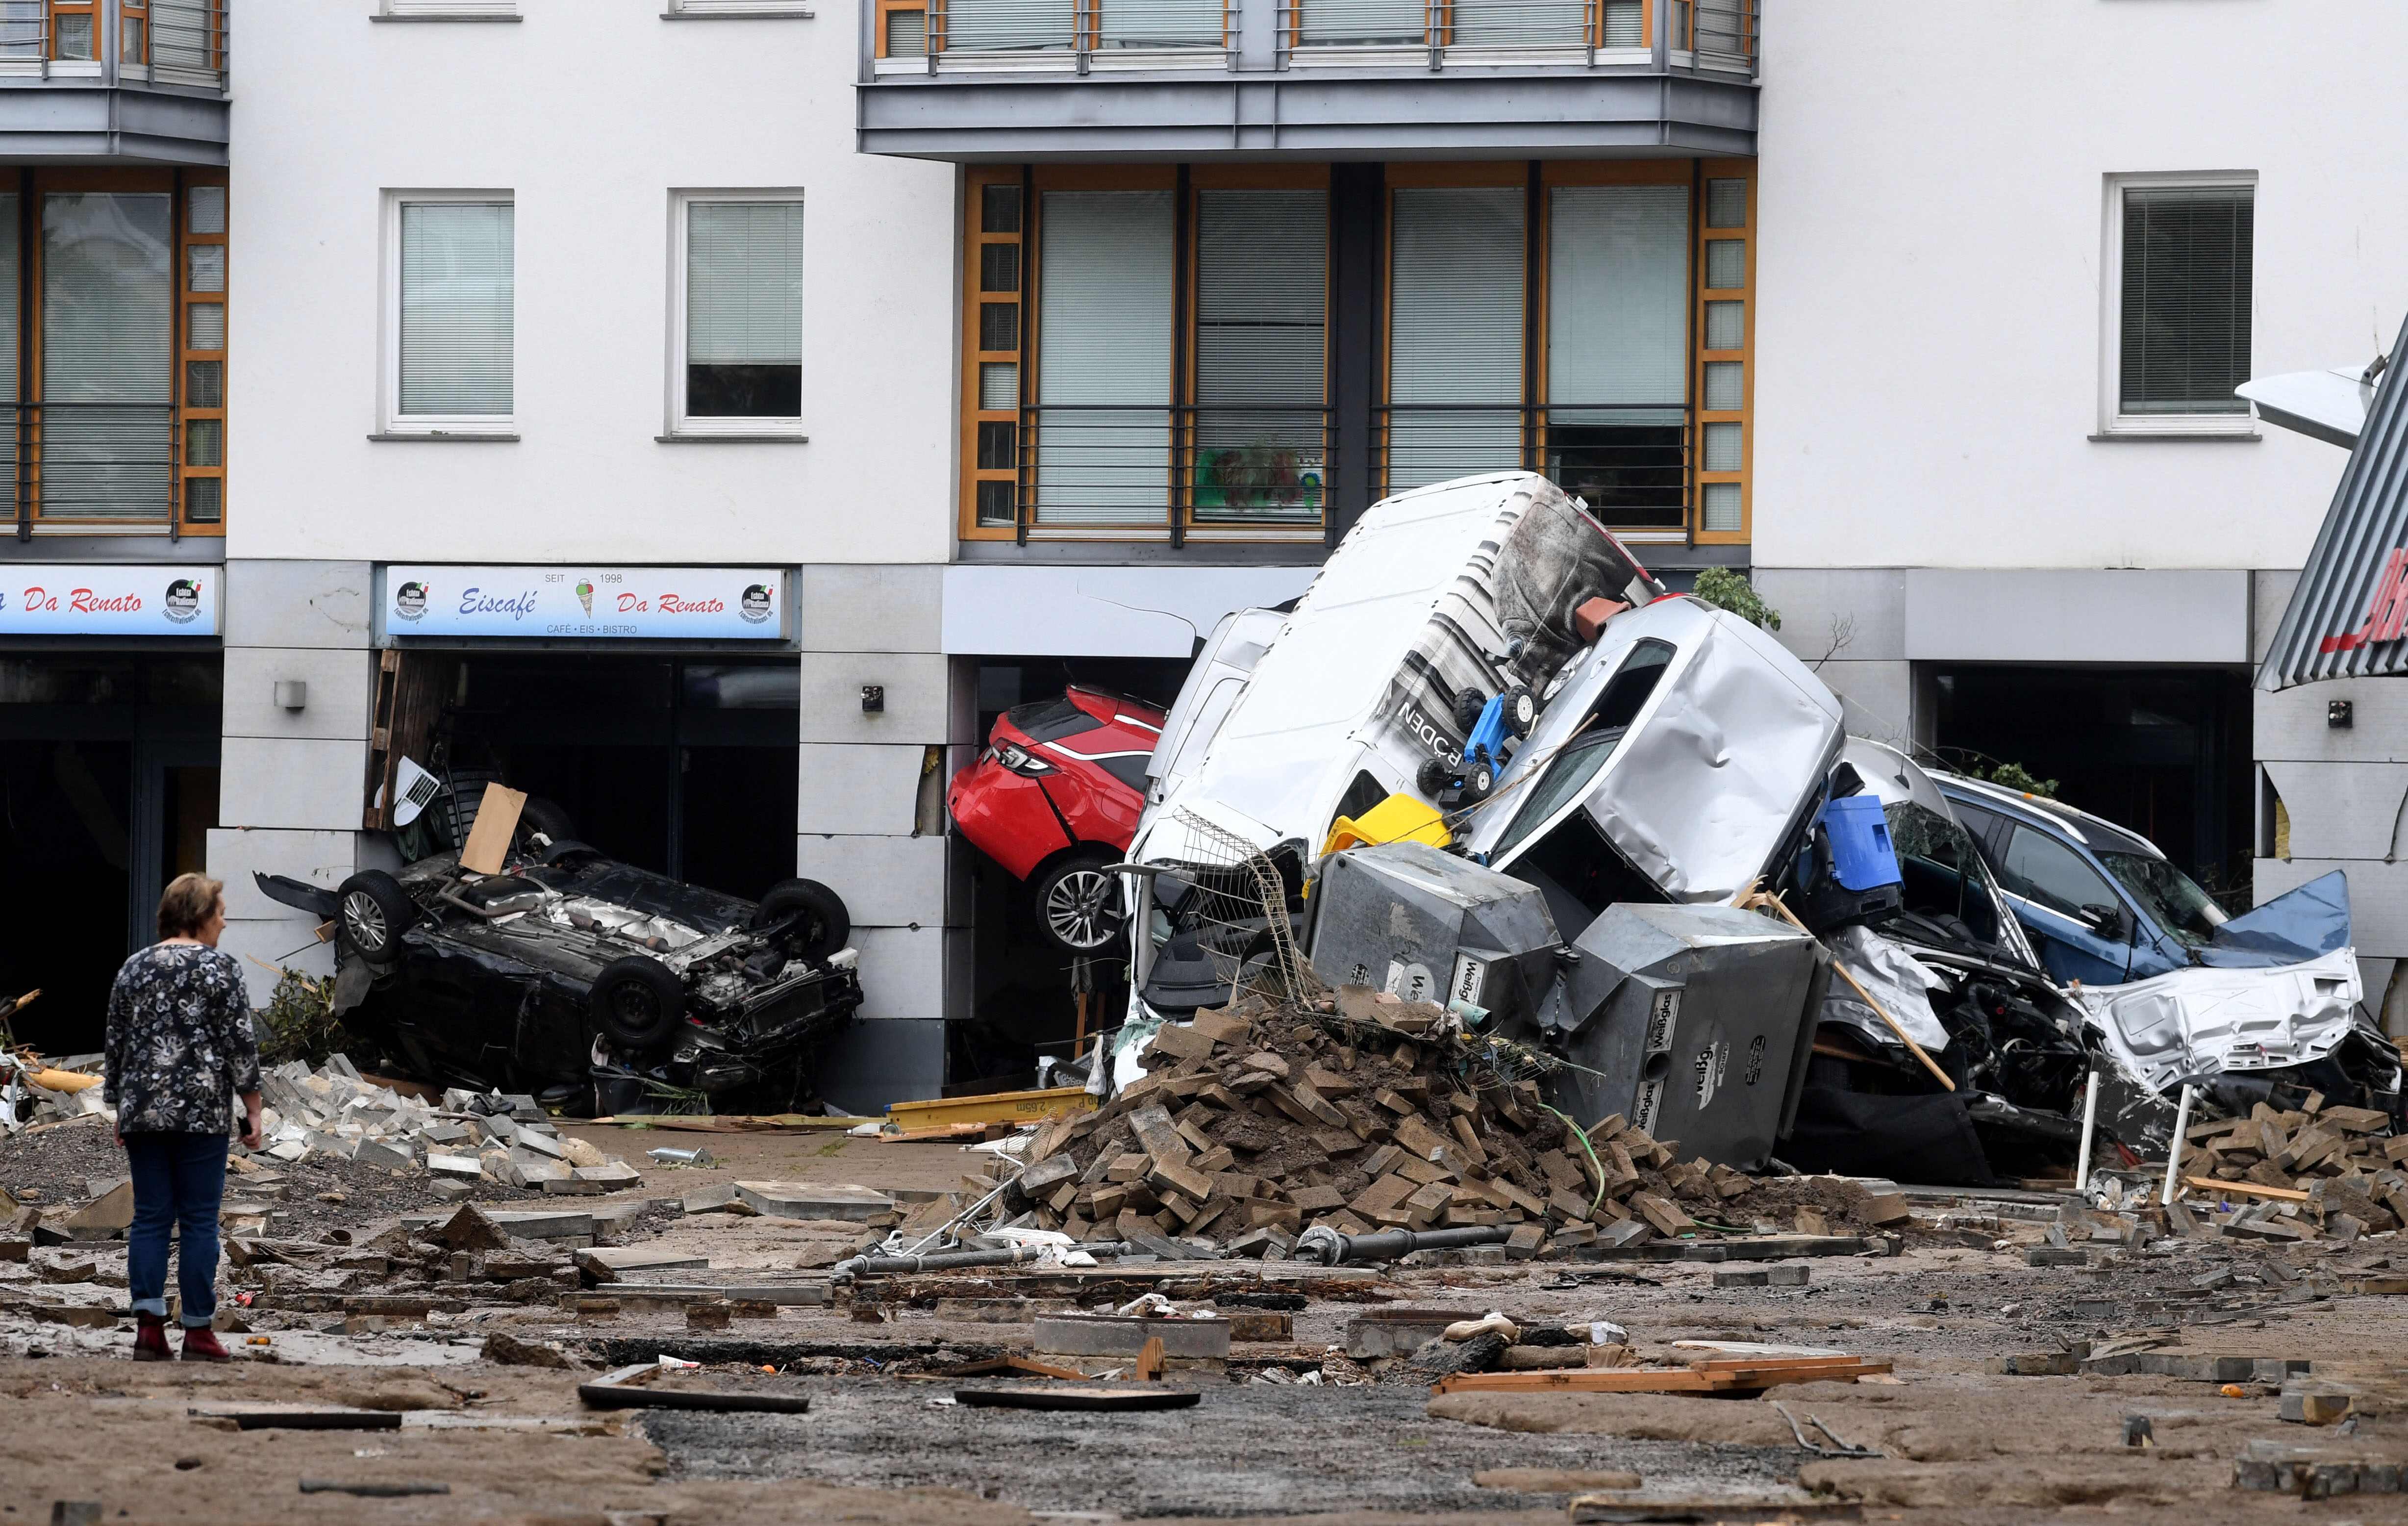 A woman looks at cars and rubble piled up in a street after the floods caused major damage in Bad Neuenahr-Ahrweiler, western Germany